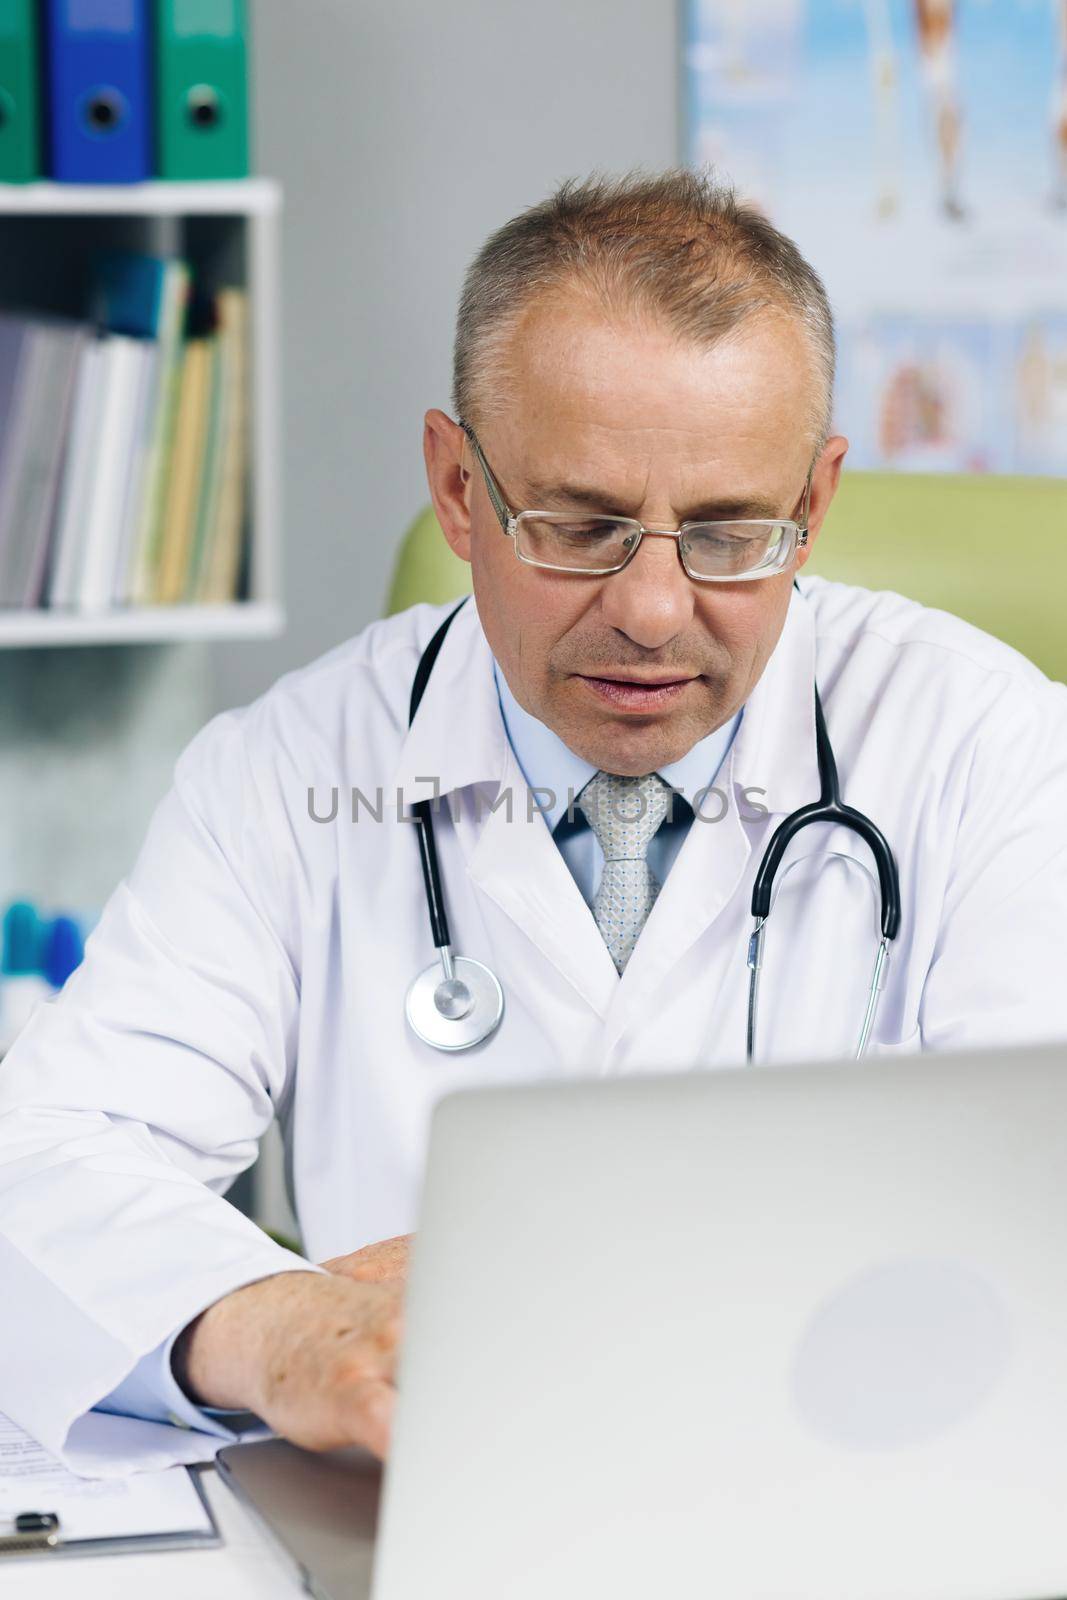 Calm Family Medical Doctor in Glasses is Working on a Laptop Computer in a Health Clinic. Physician in White Lab Coat is Browsing Medical History Behind a Desk in Hospital Office by uflypro